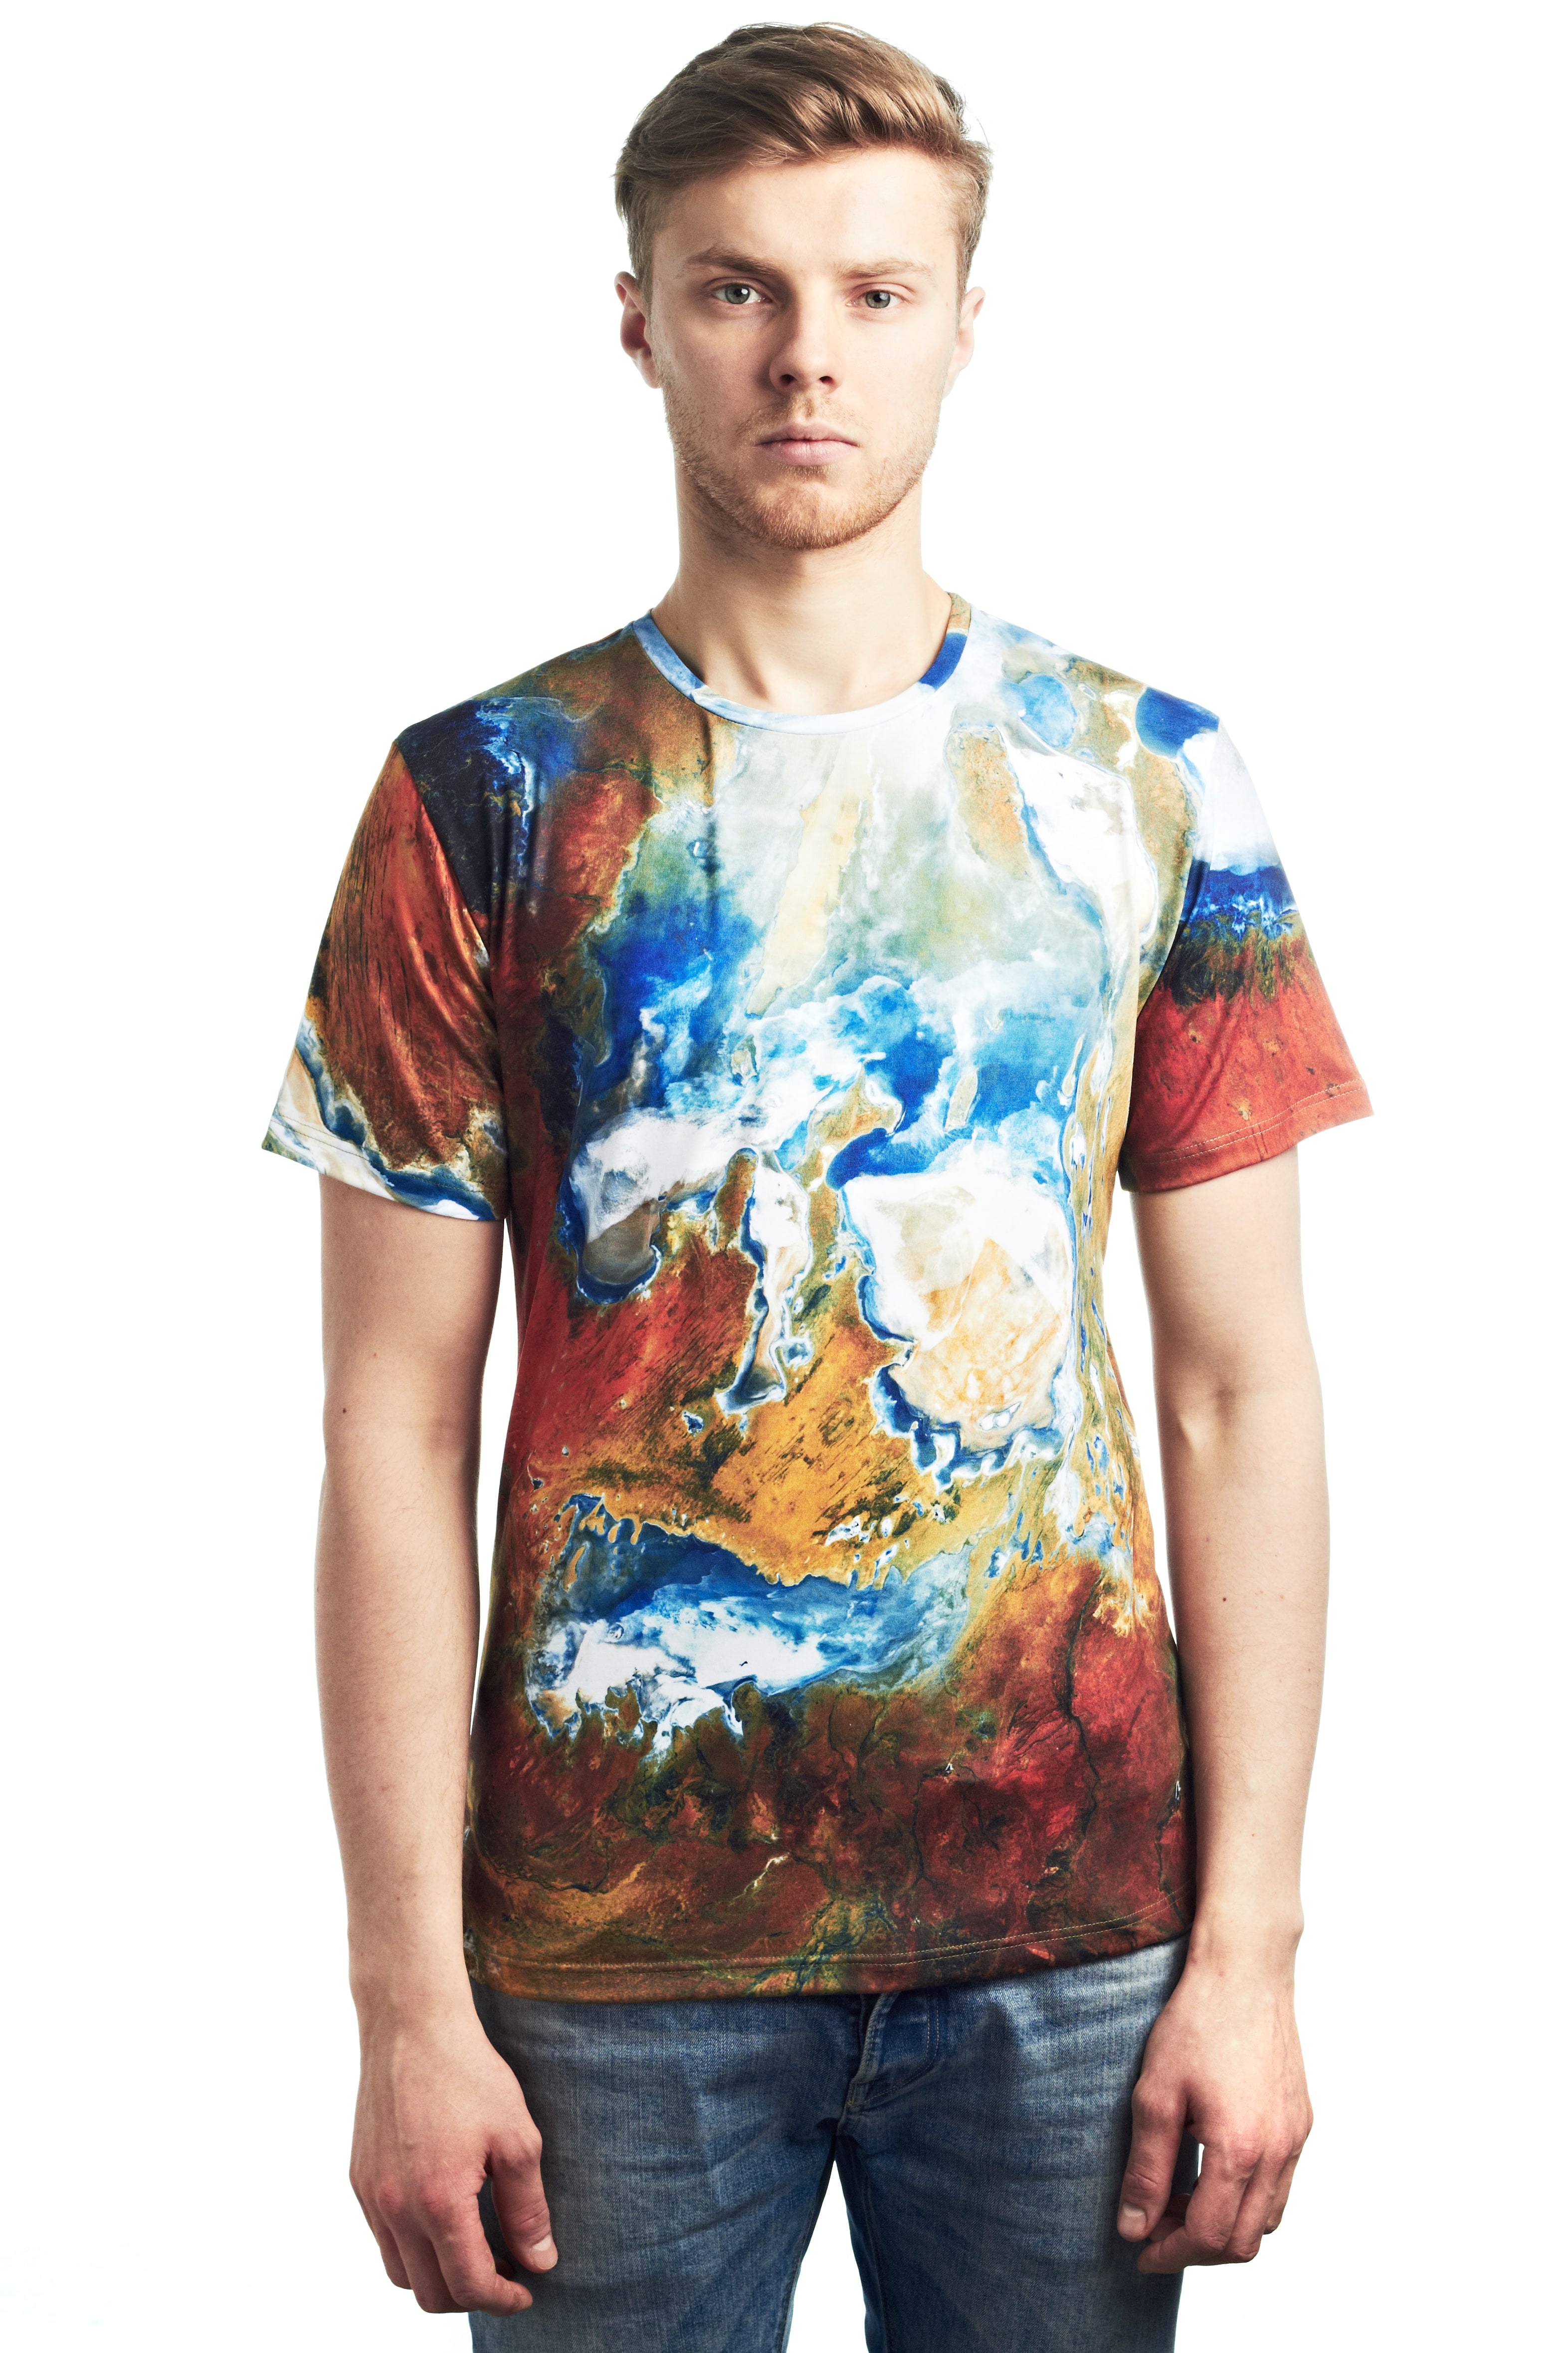 DUE – digitally printed t-shirts [Submitted] — Hide Your Arms